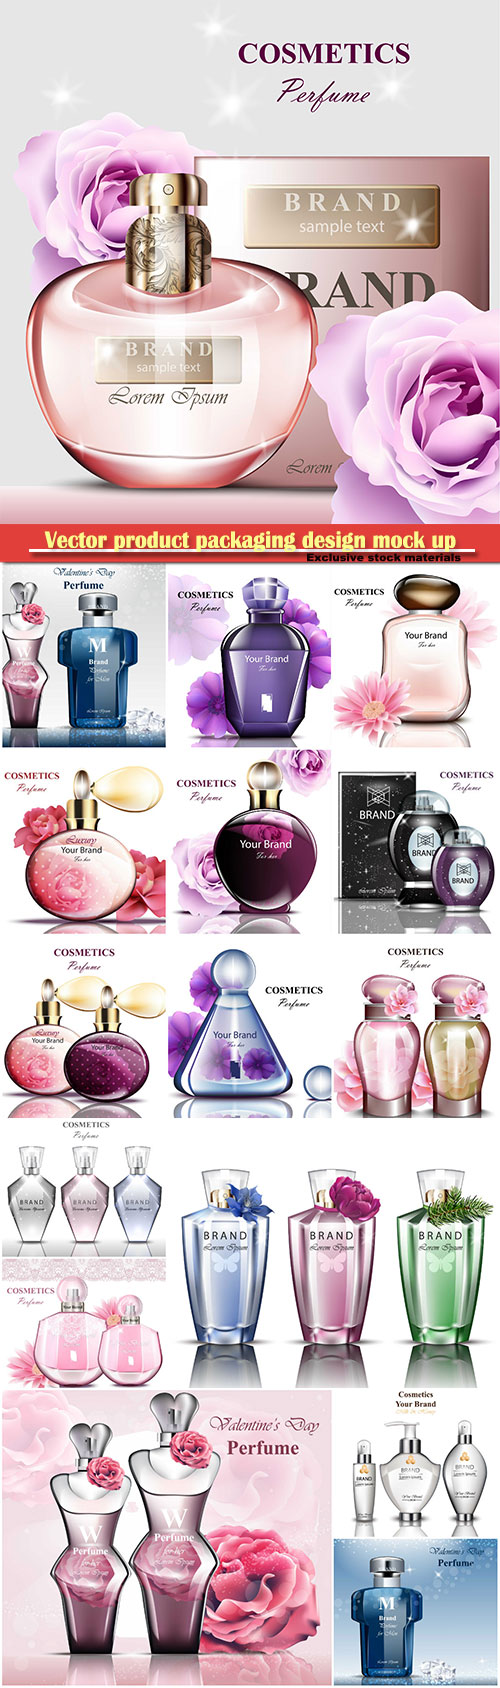 Realistic vector product packaging design mock up, perfume bottle